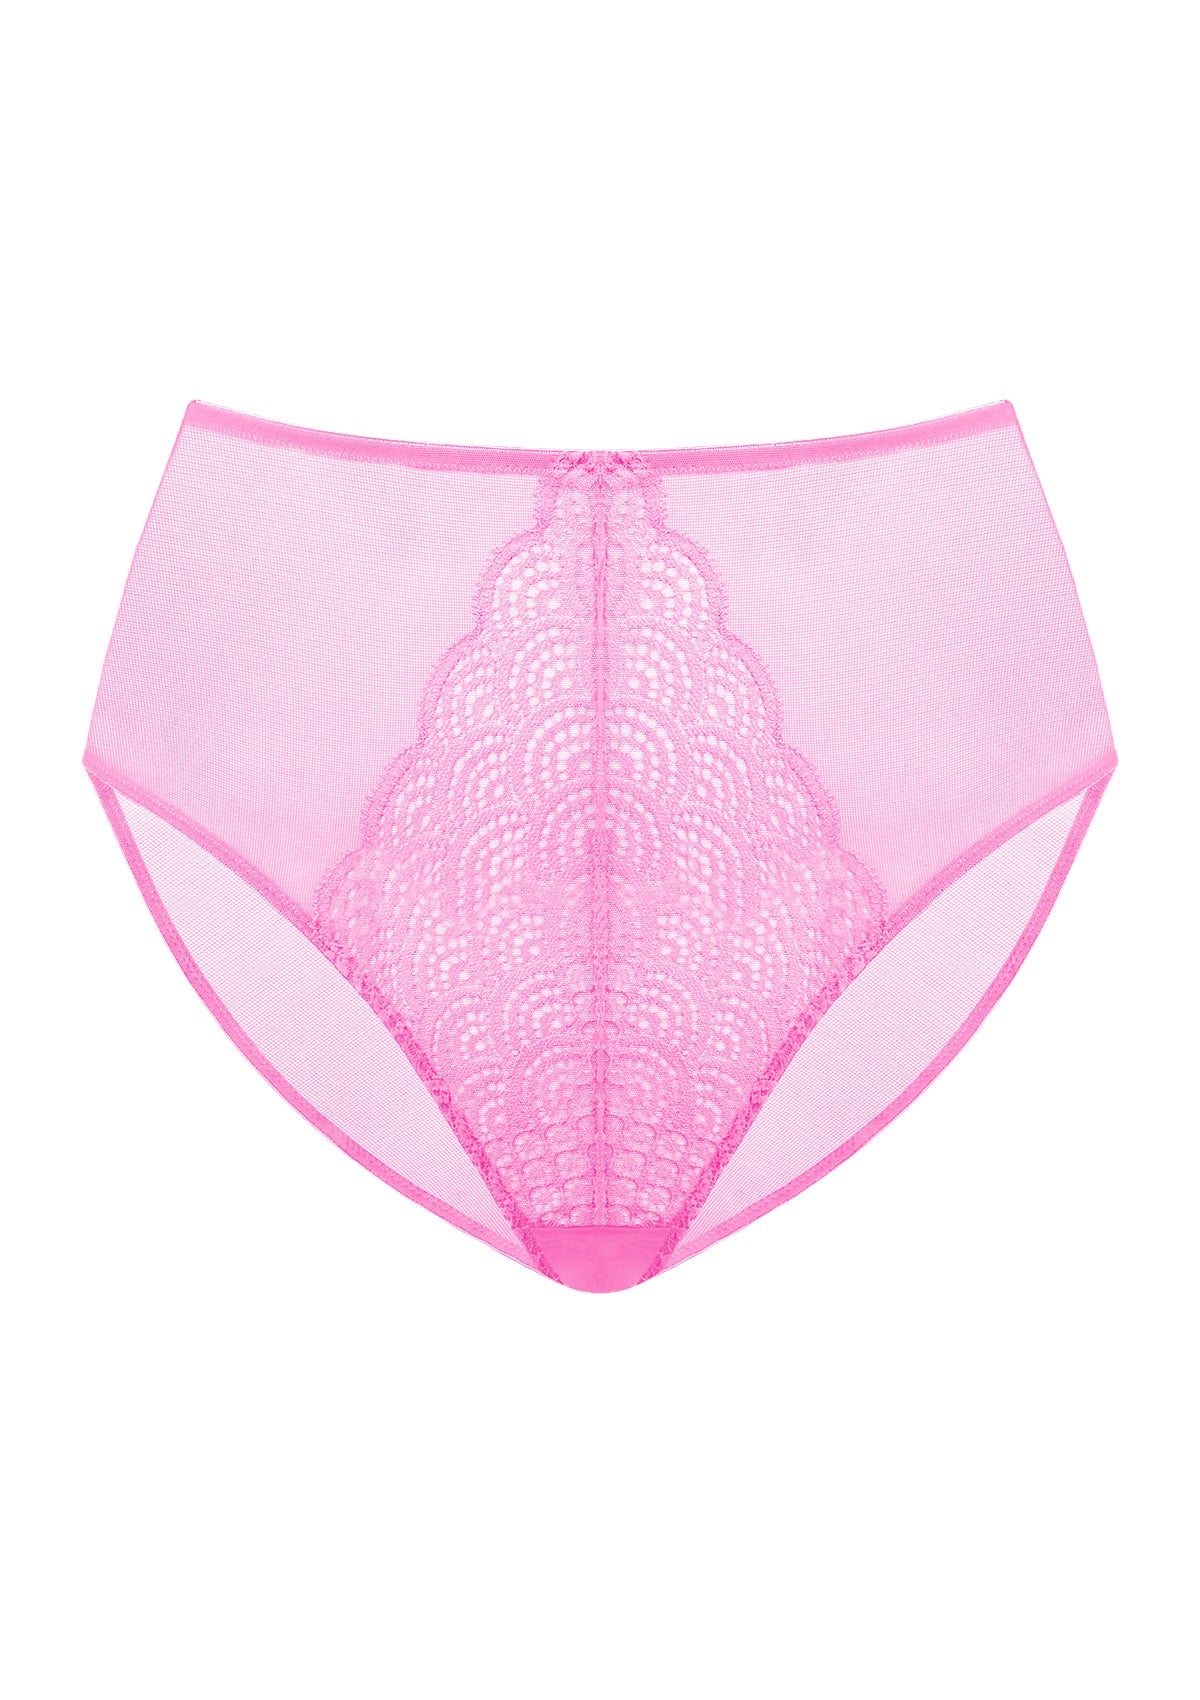 HSIA Spring Romance High-Rise Floral Lacy Panty-Comfort In Style - M / Pink